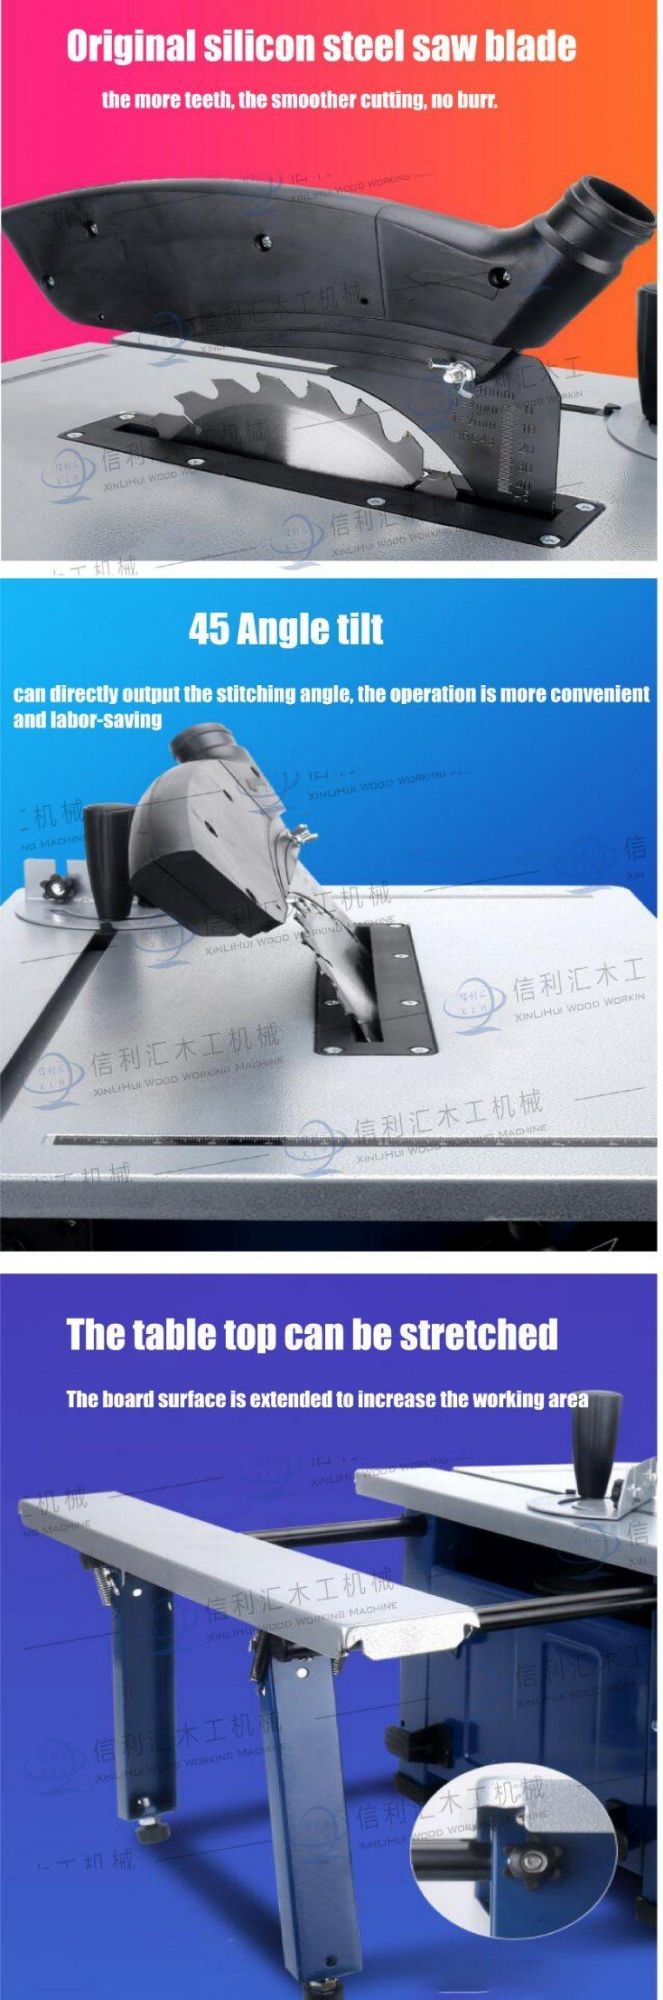 High Quality Custom DIY Small Hobby Mini Electric Wood Woodworking Cutting Circular Table Bench Saw Sawing Machine Small Saw with Hand Saw Blade